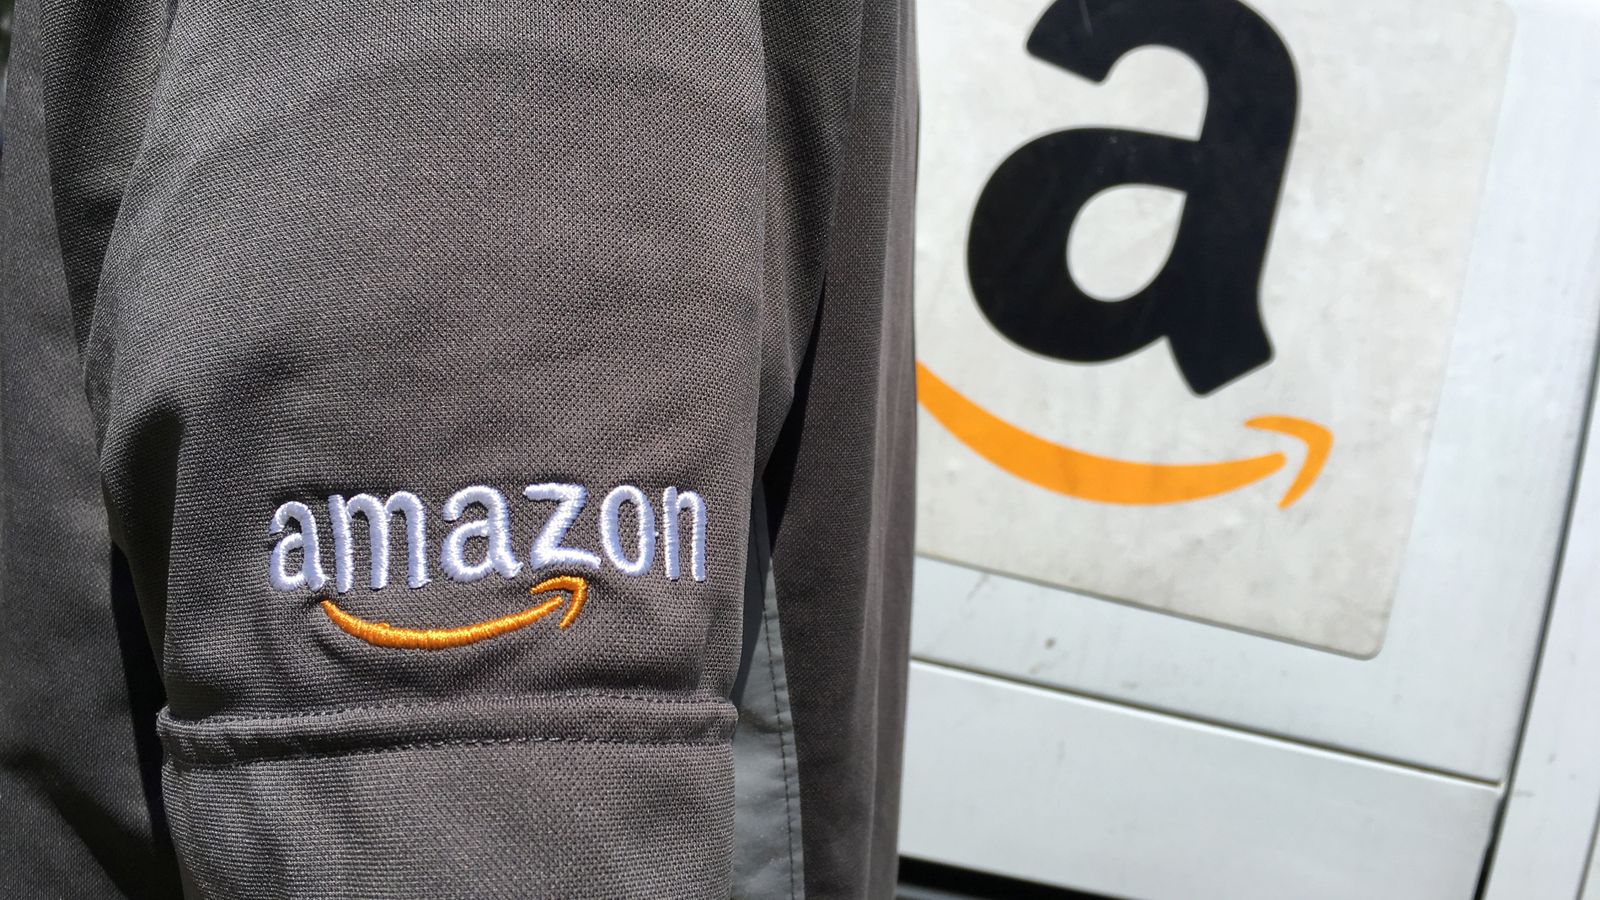 Amazon drivers handed $60m in tips that were withheld by company - after action by US watchdog